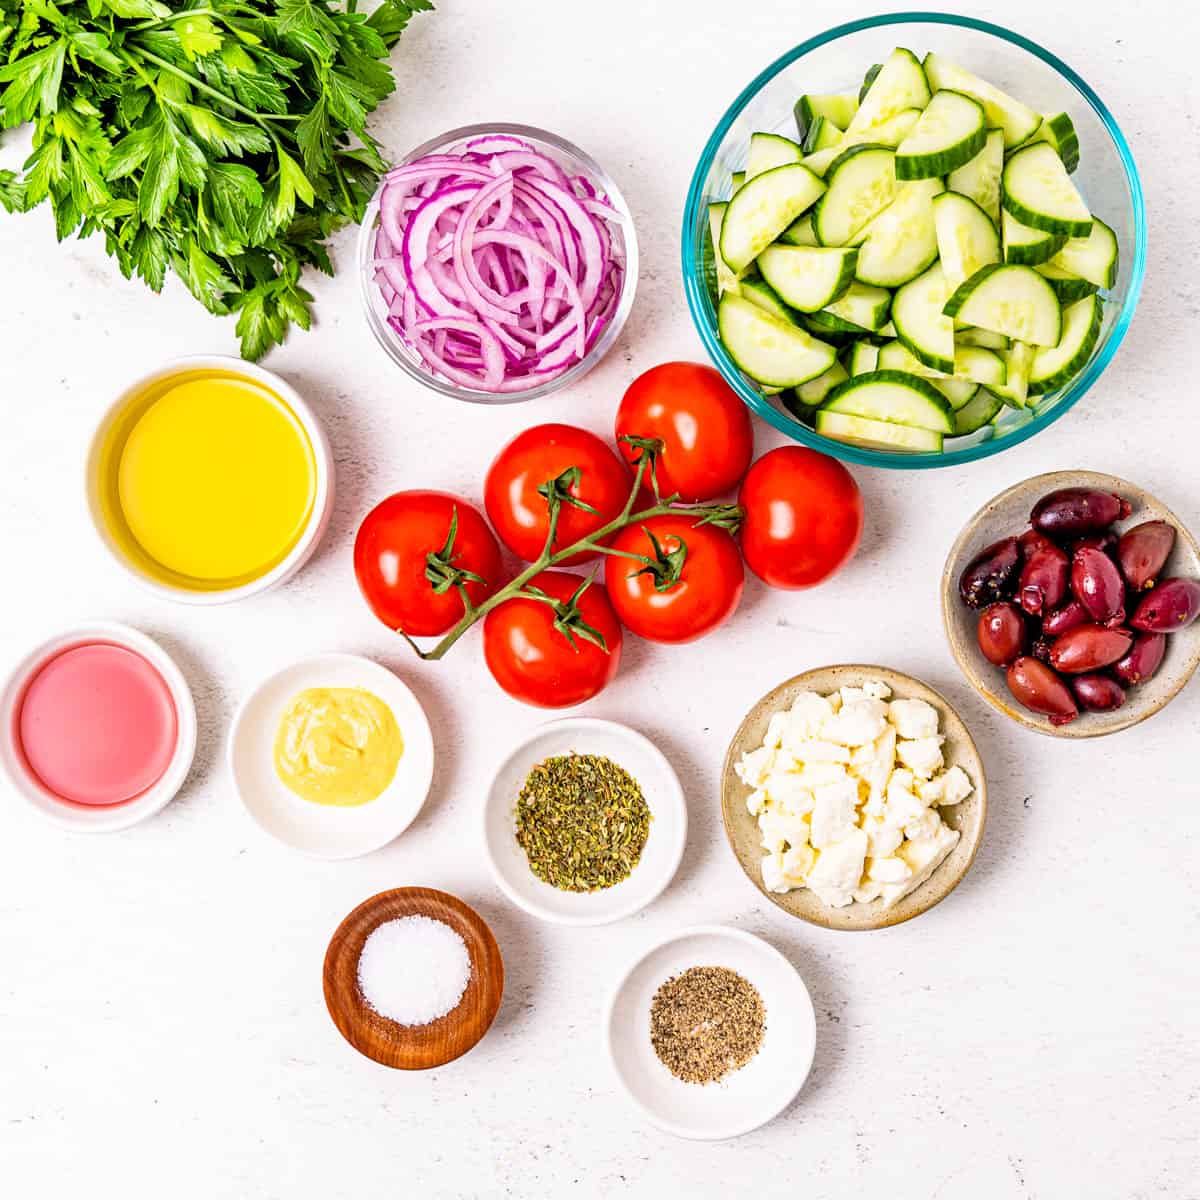 Ingredients for traditional Greek salad and a Greek vinaigrette dressing arranged in individual bowls on a countertop.